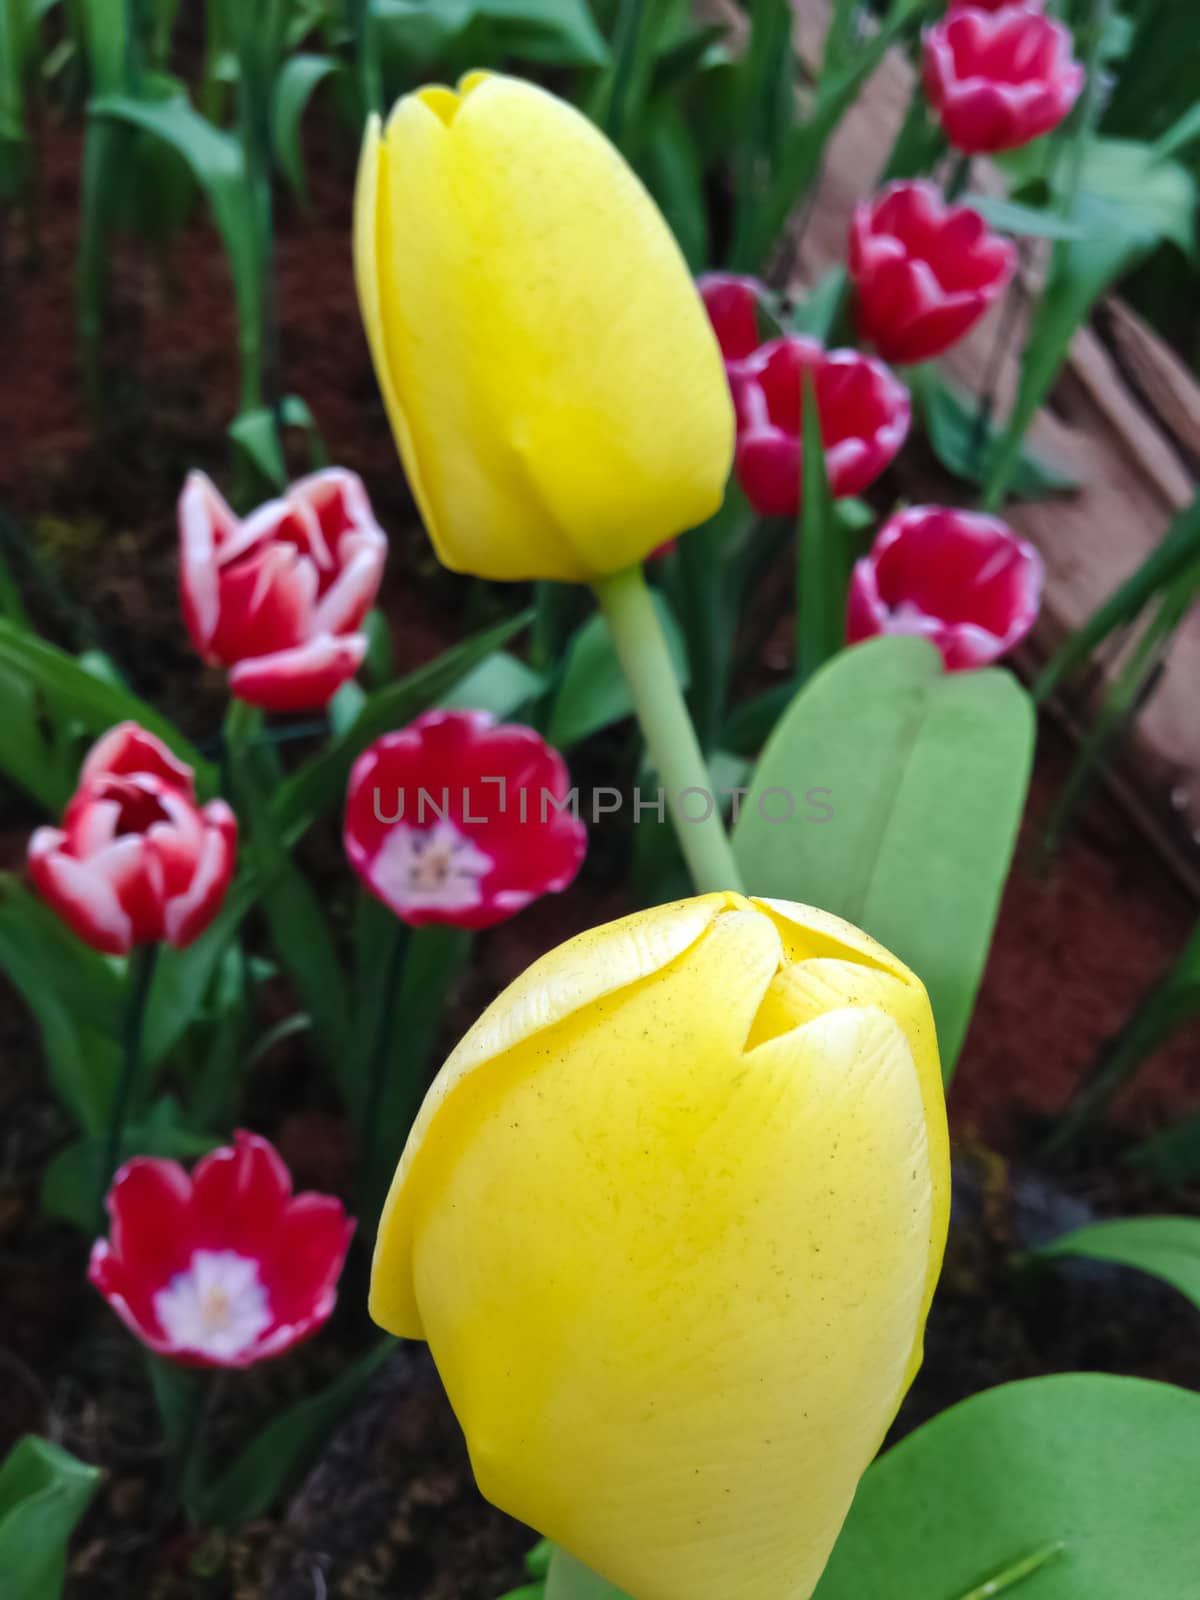 colorful tulips. tulips in spring 